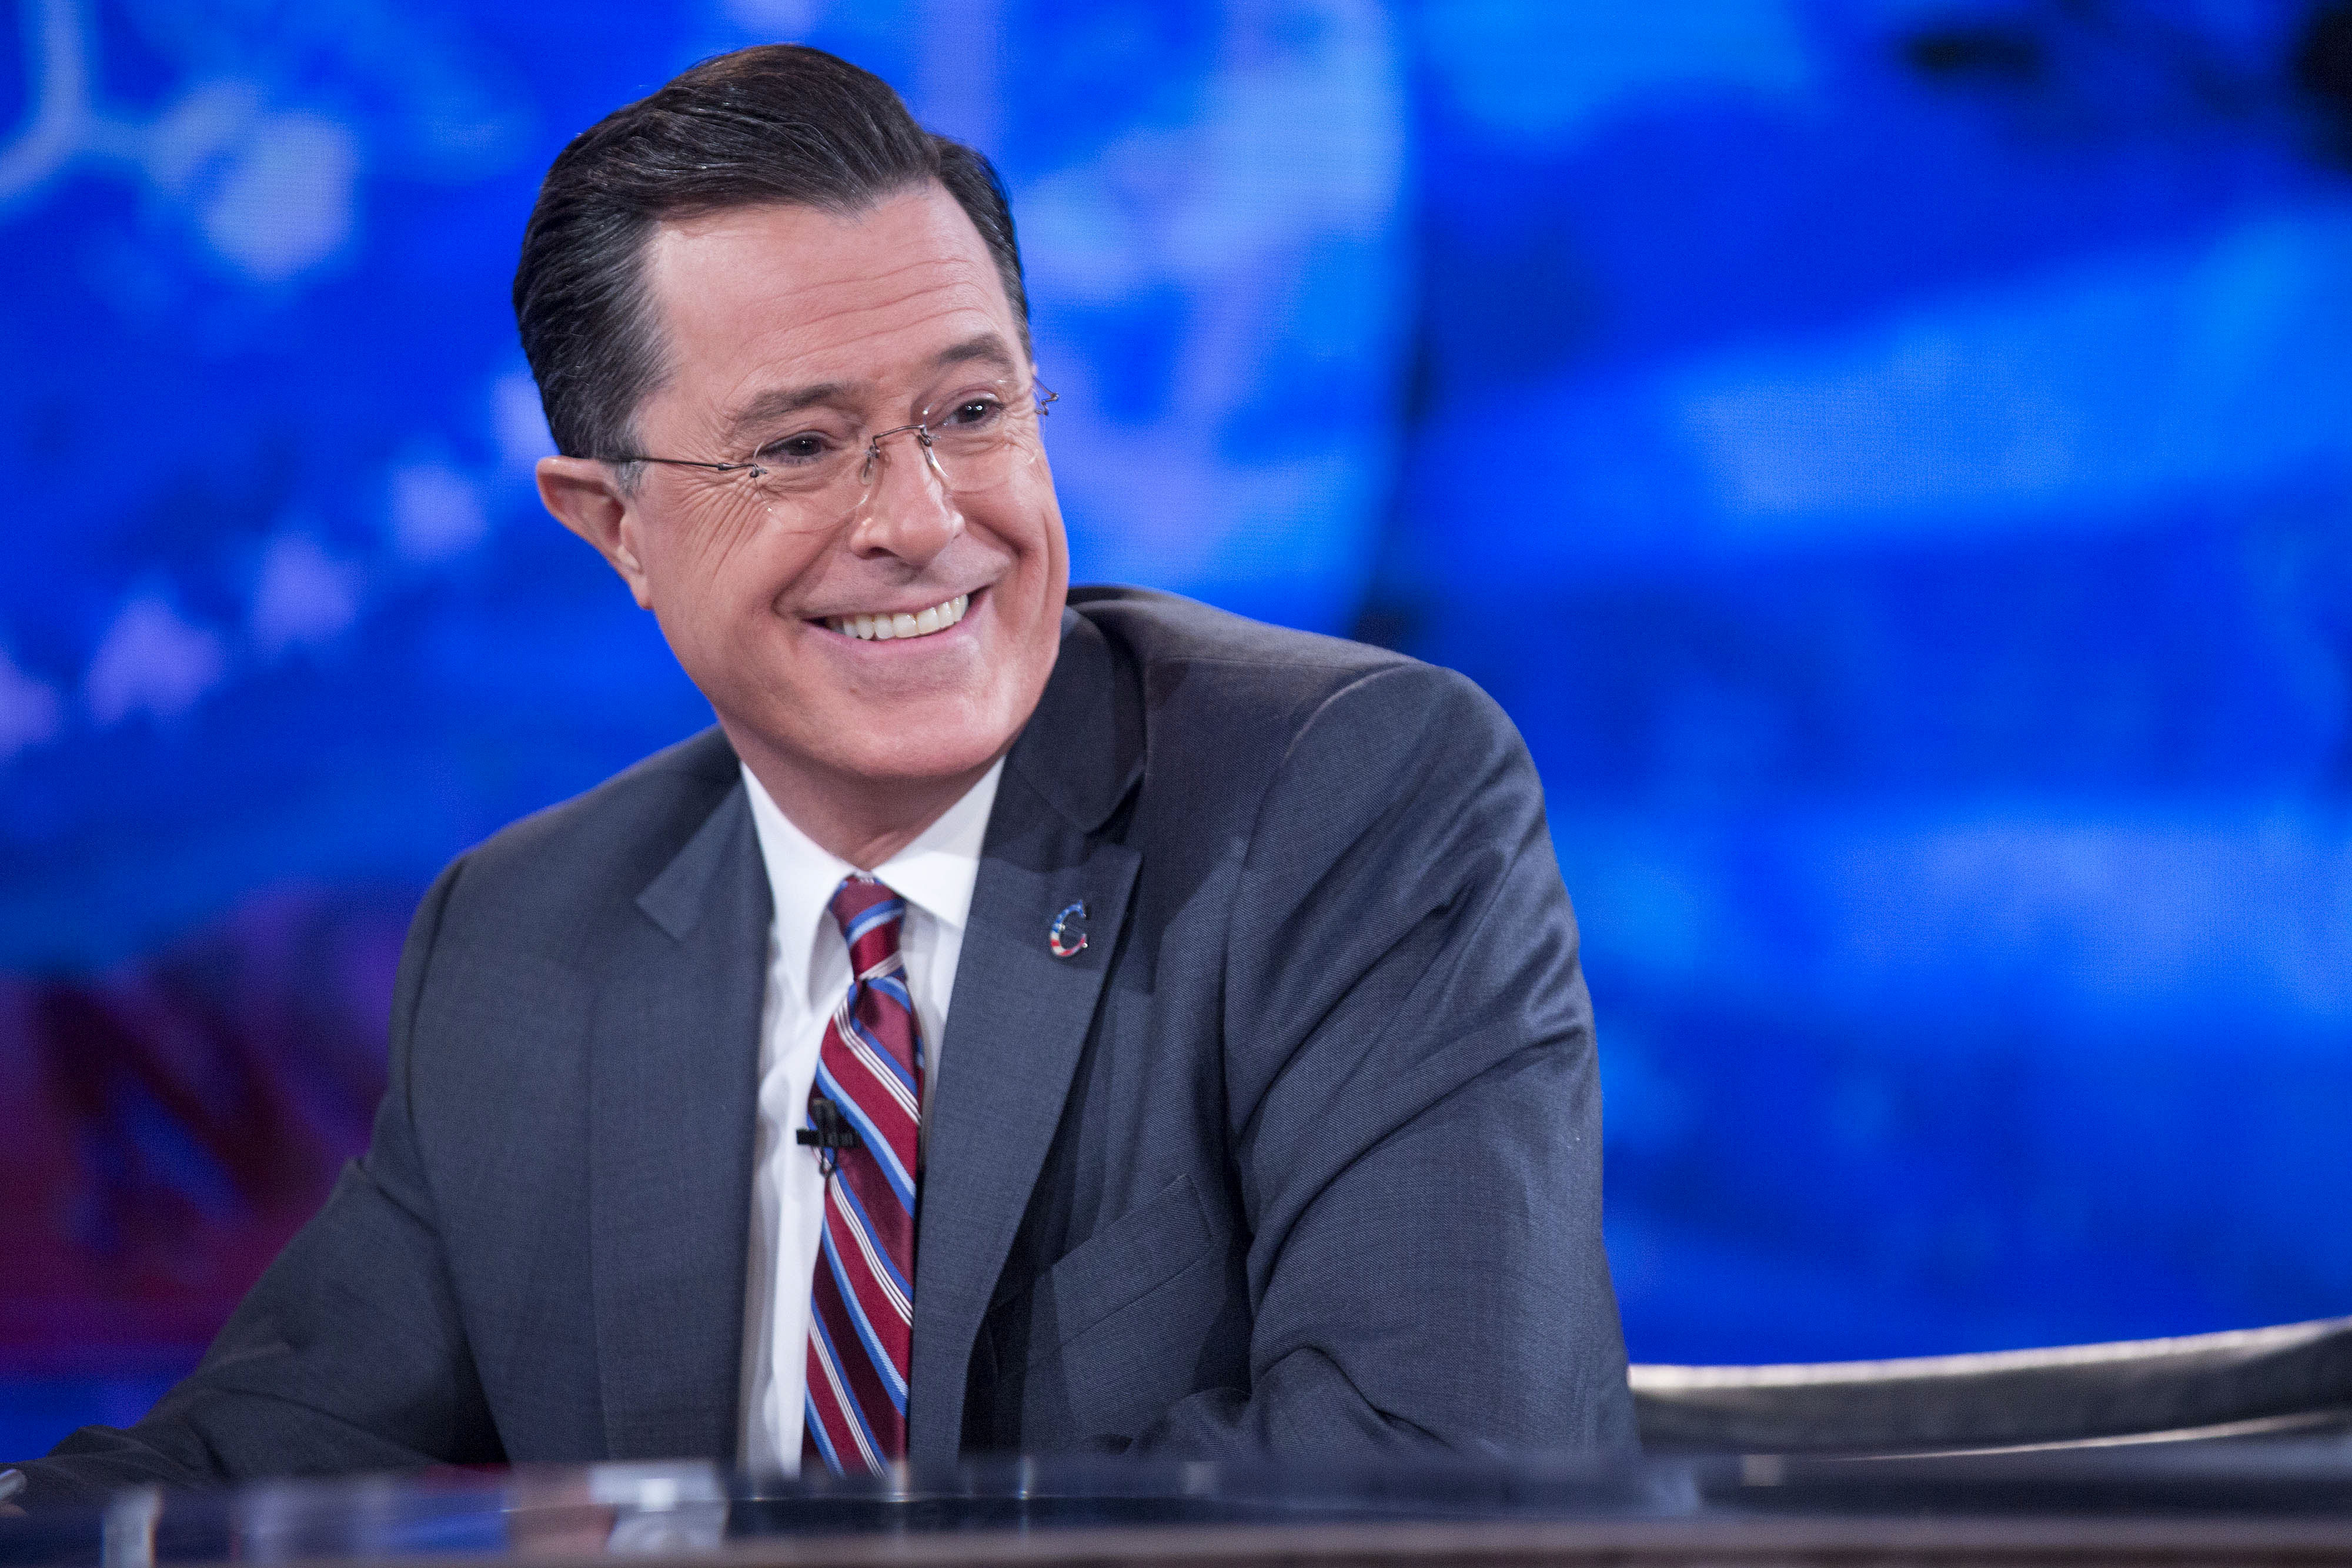 Stephen Colbert during a taping of Comedy Central's "The Colbert Report" on Dec. 8, 2014 in Washington, DC. (Andrew Harrer—Pool/Getty Images)